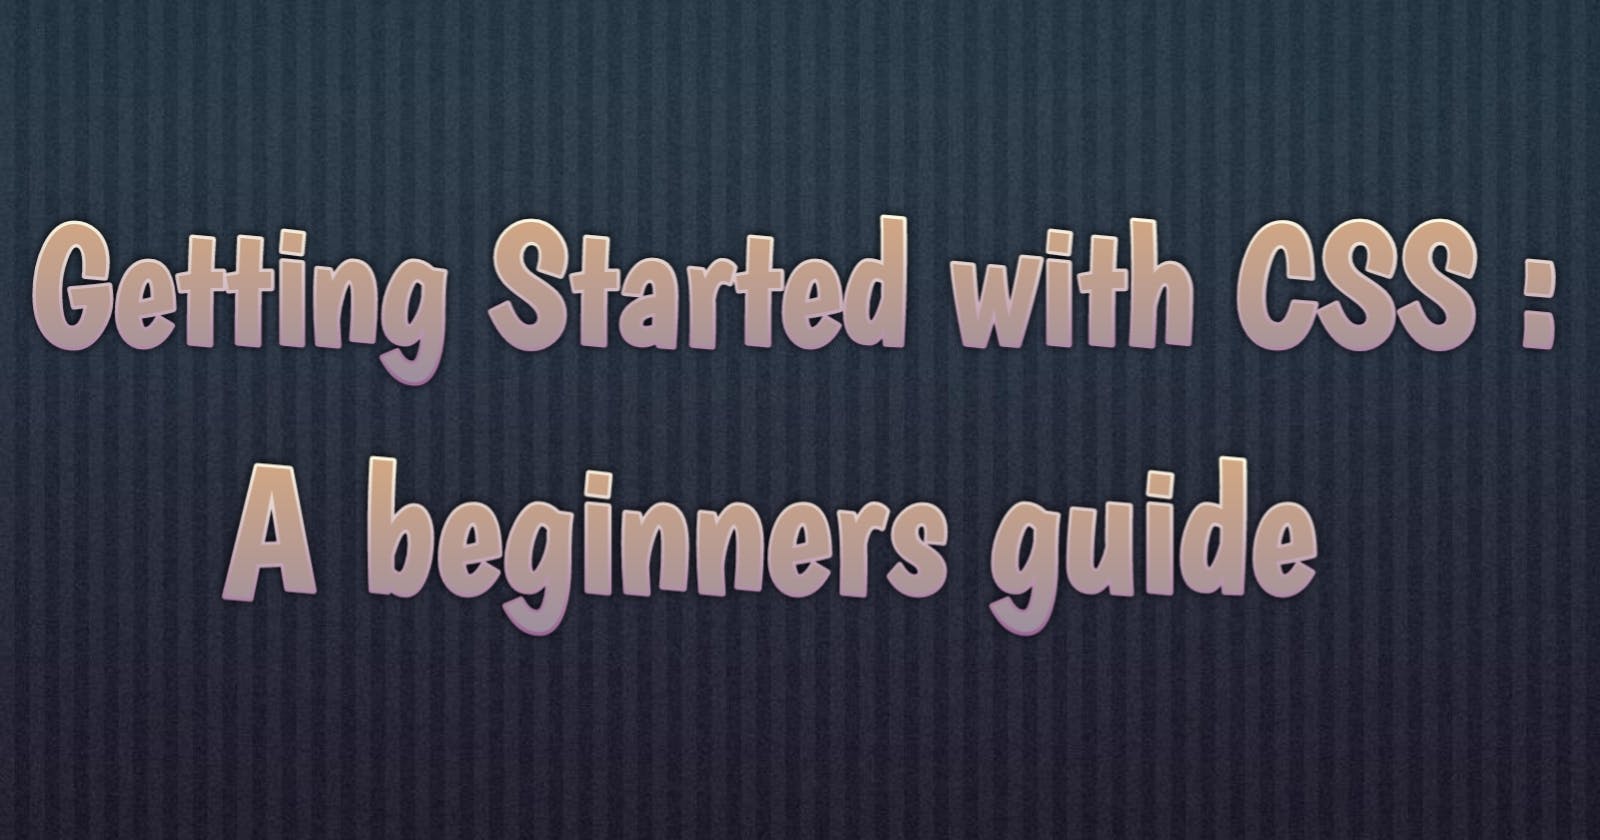 Getting Started with CSS : A beginners guide.